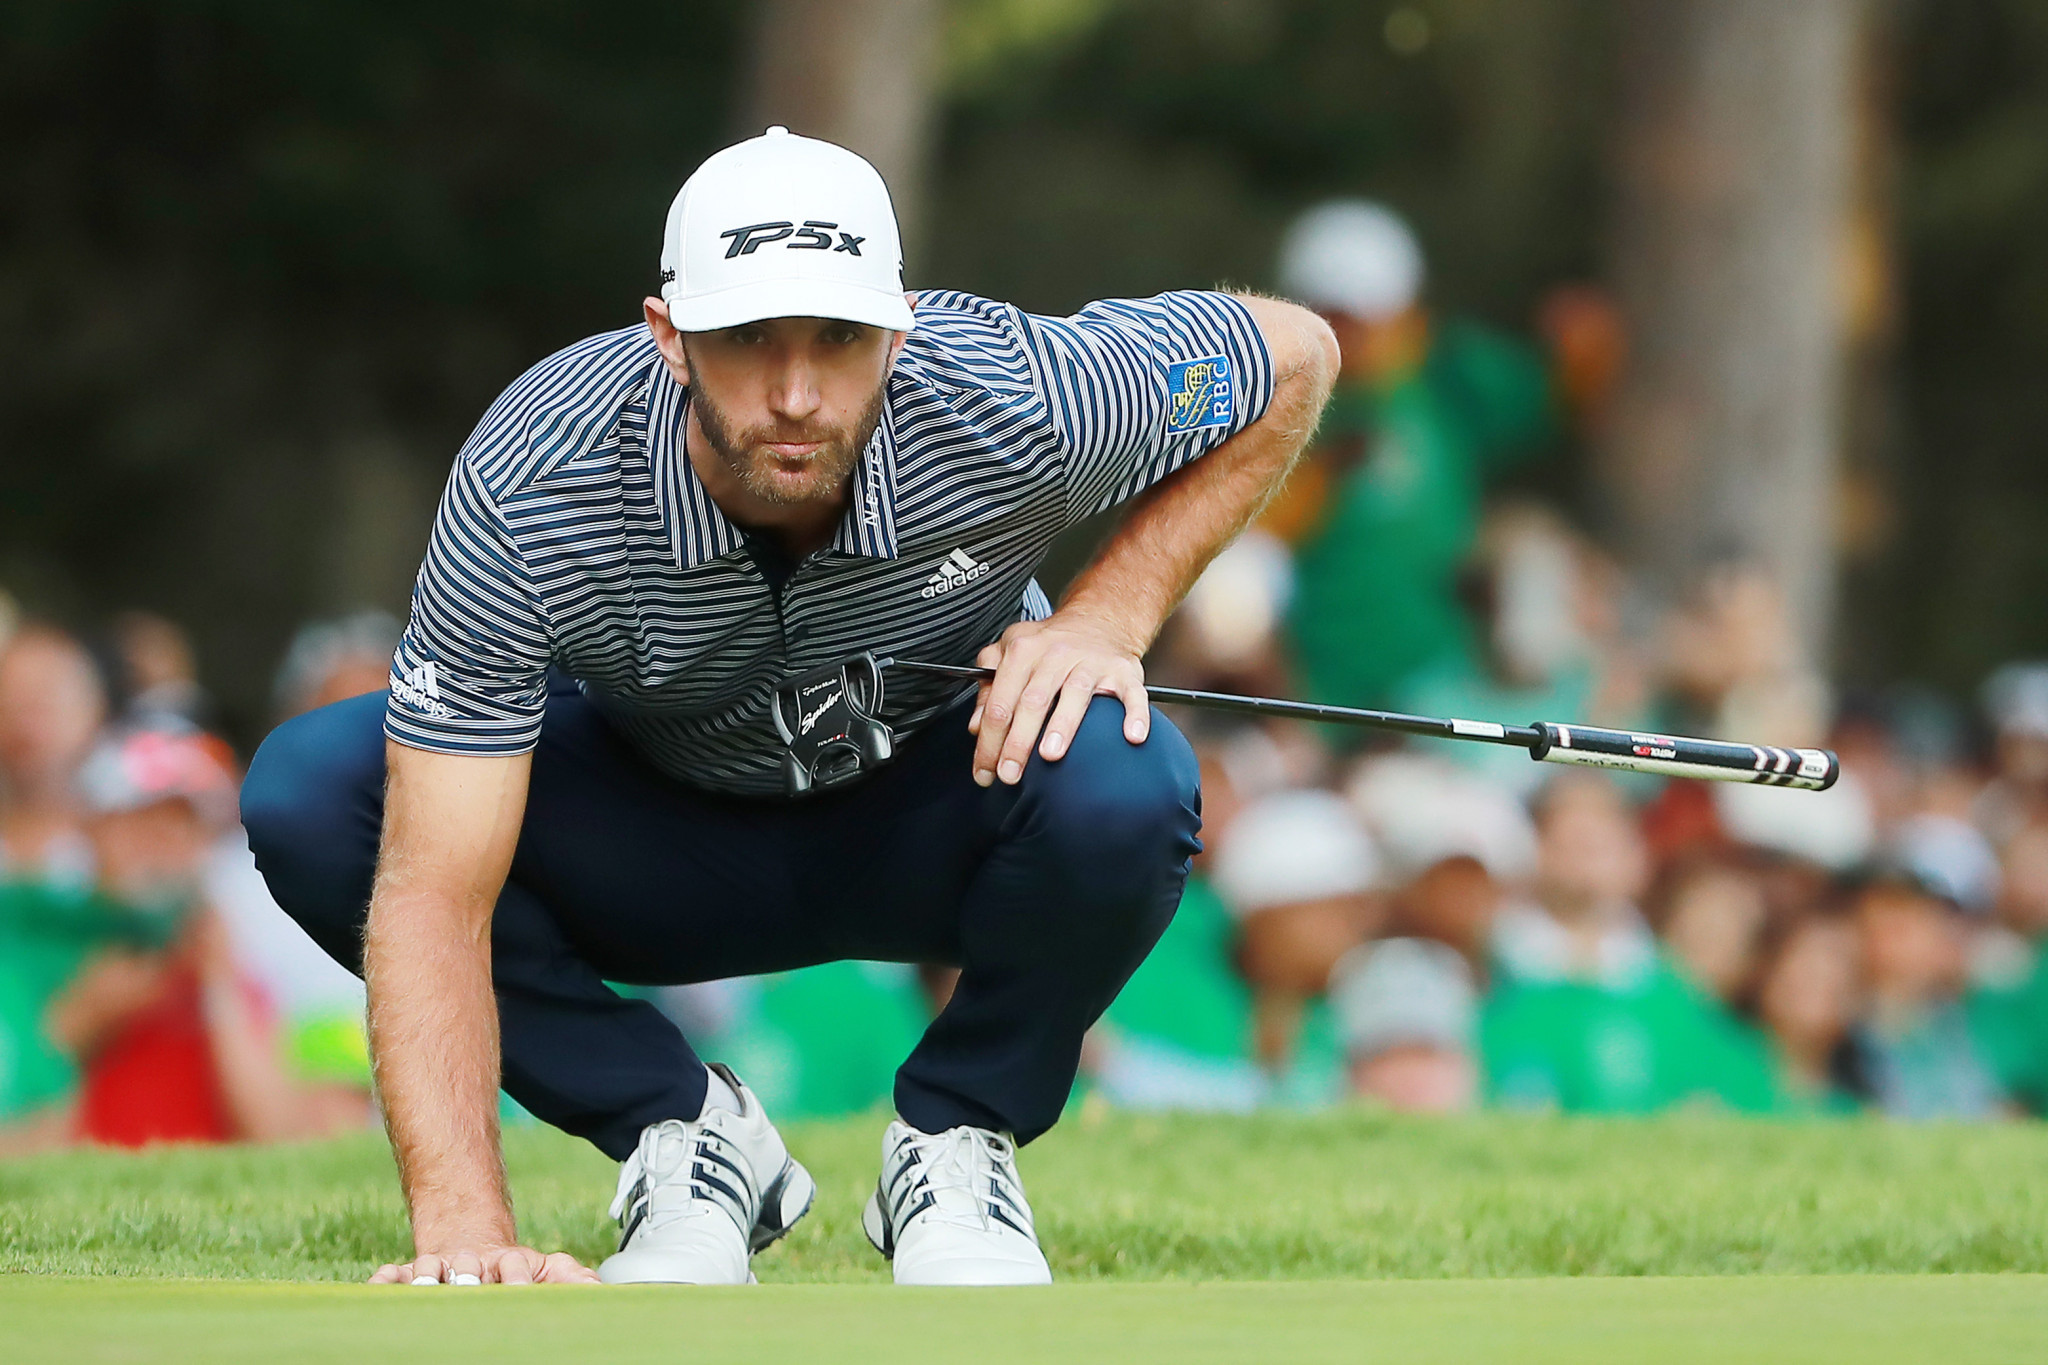 Dustin Johnson finished the competition on 21-under-par ©Getty Images